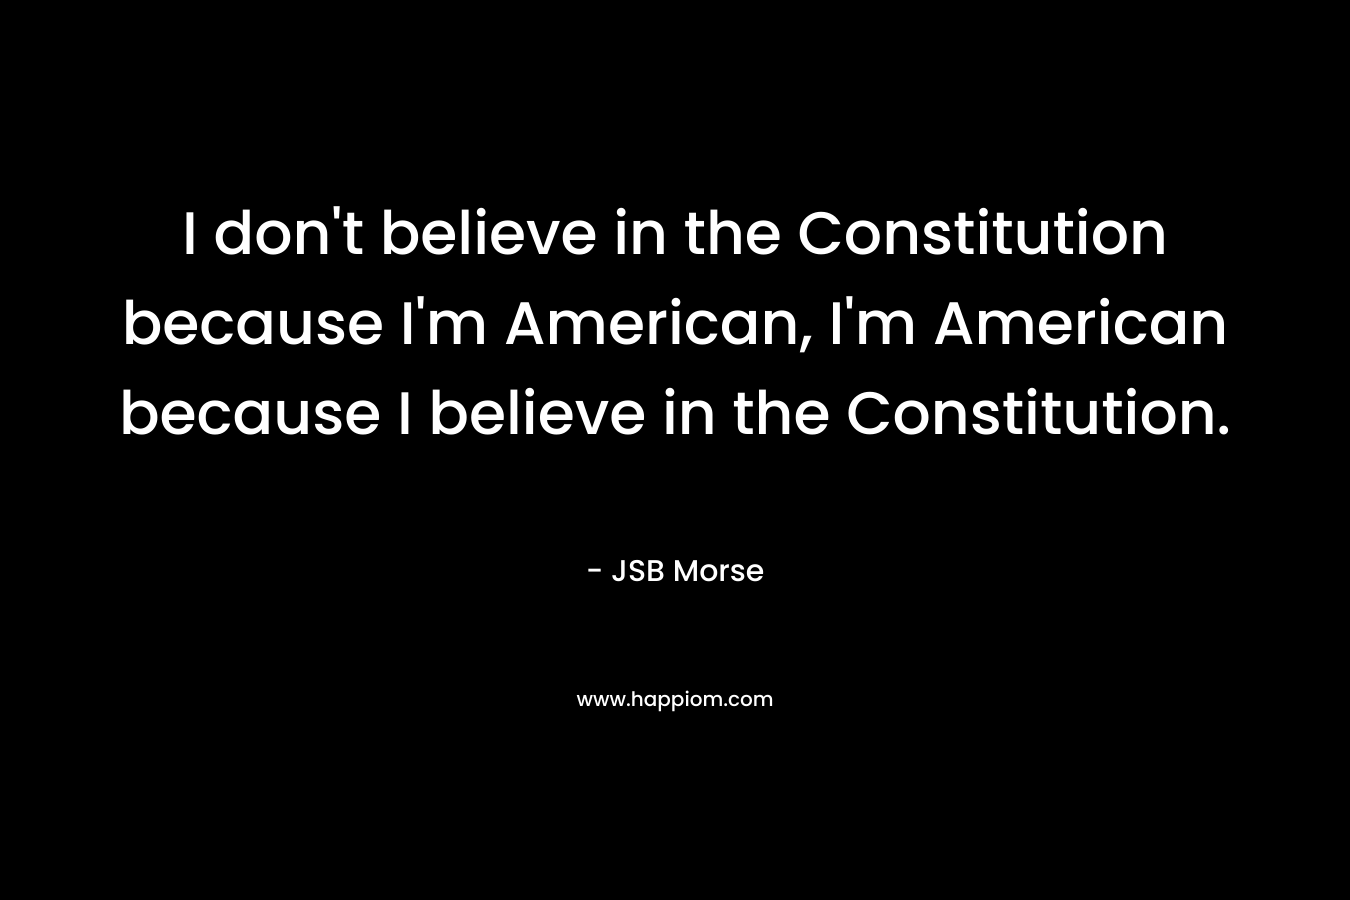 I don't believe in the Constitution because I'm American, I'm American because I believe in the Constitution.